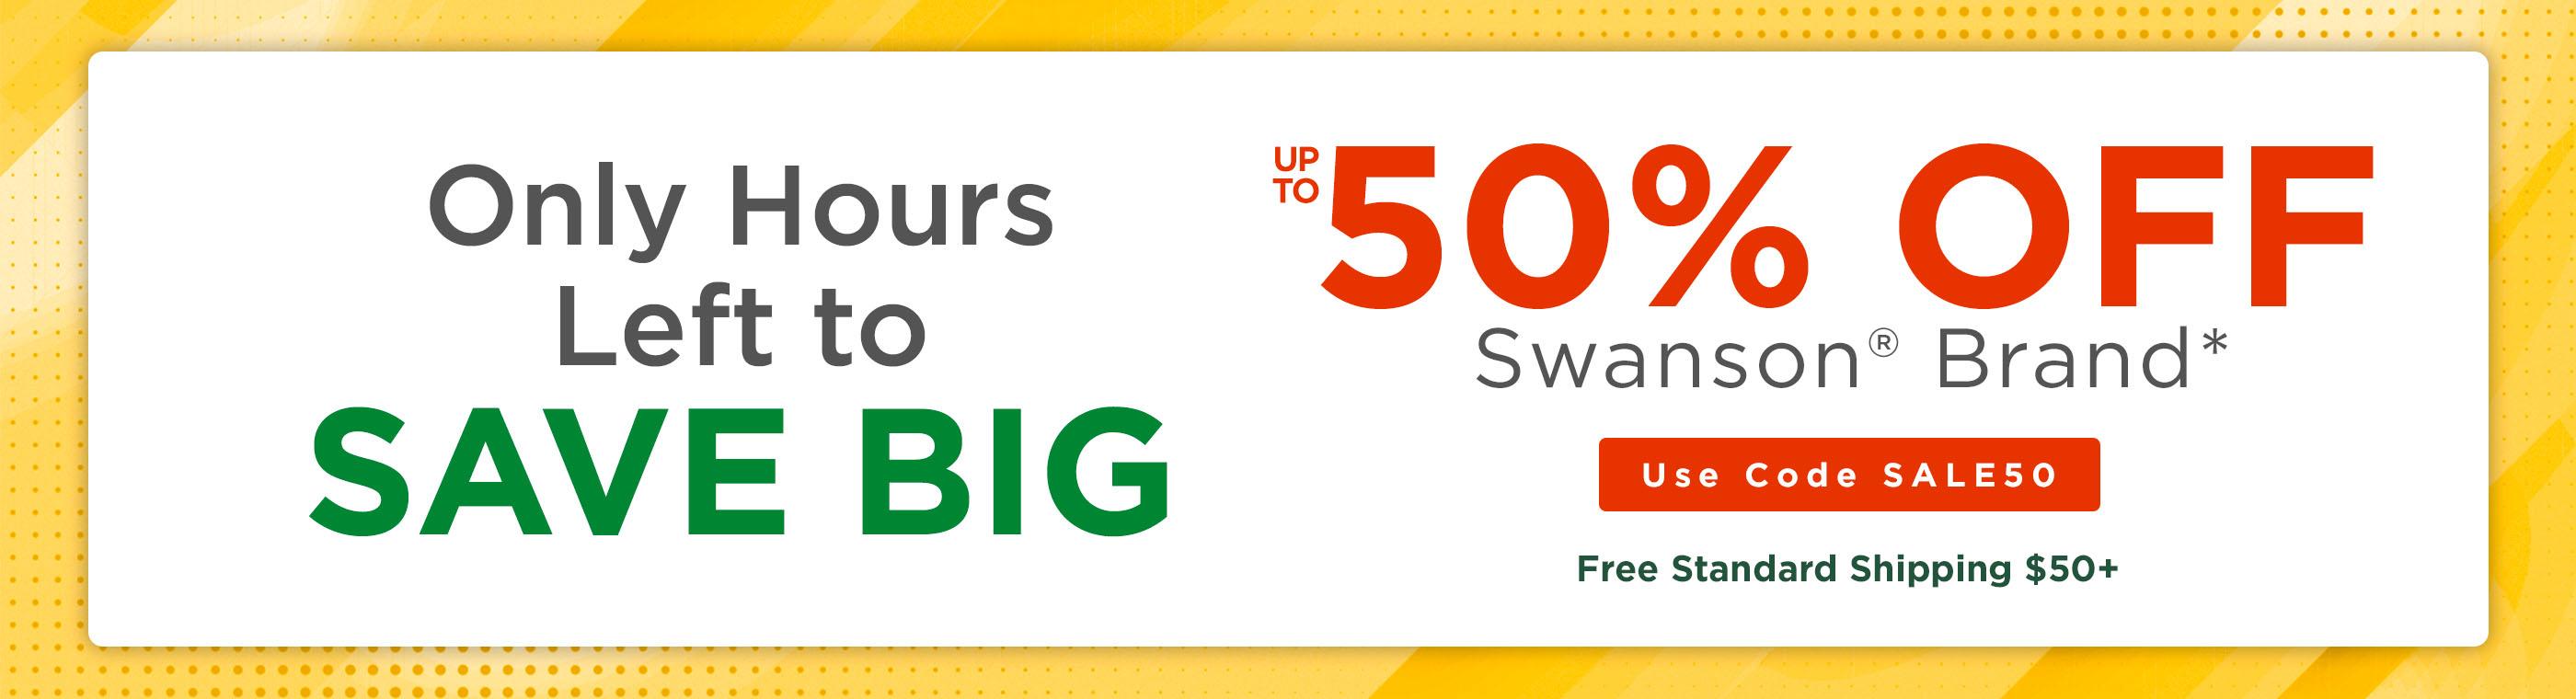 Up to 50% off Swanson Brand 